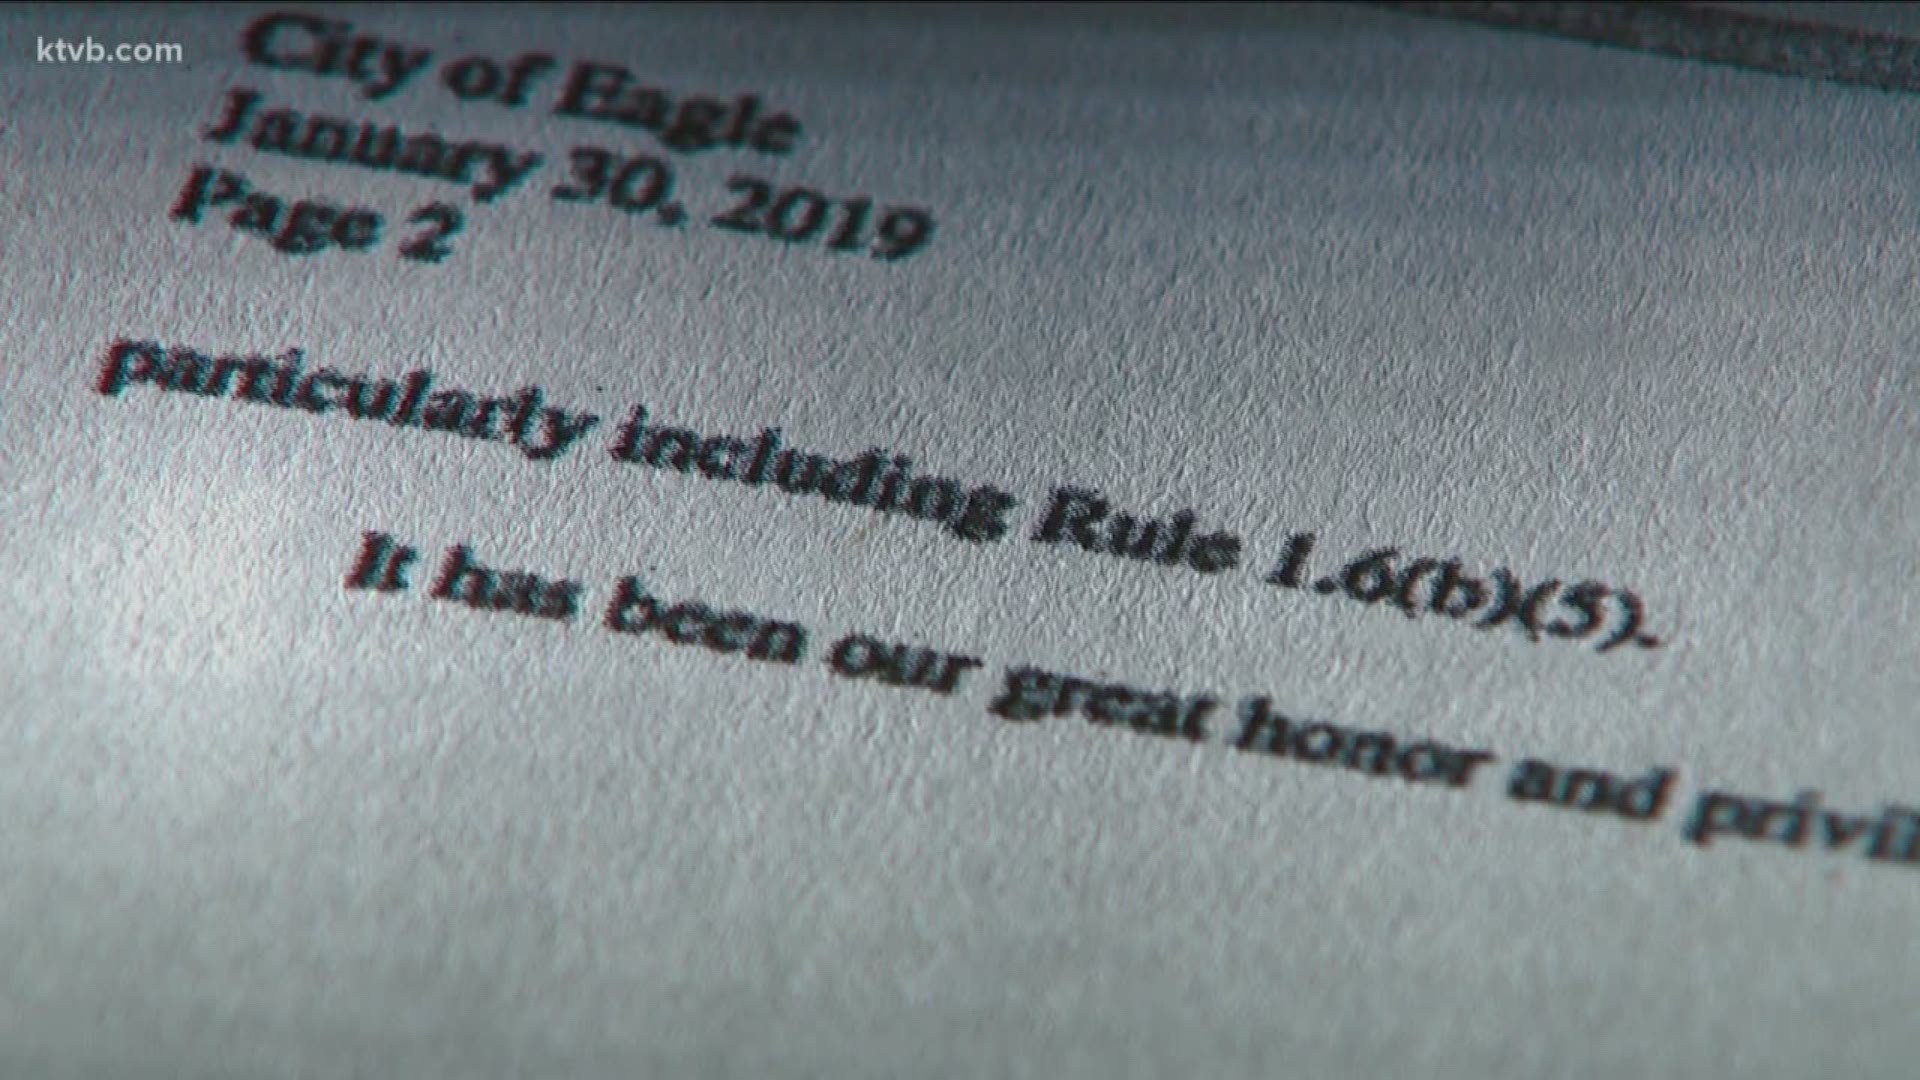 In a letter from the law firm, they claim that the City of Eagle broke multiple rules of conduct in Idaho. The city said they have no comment on the matter.